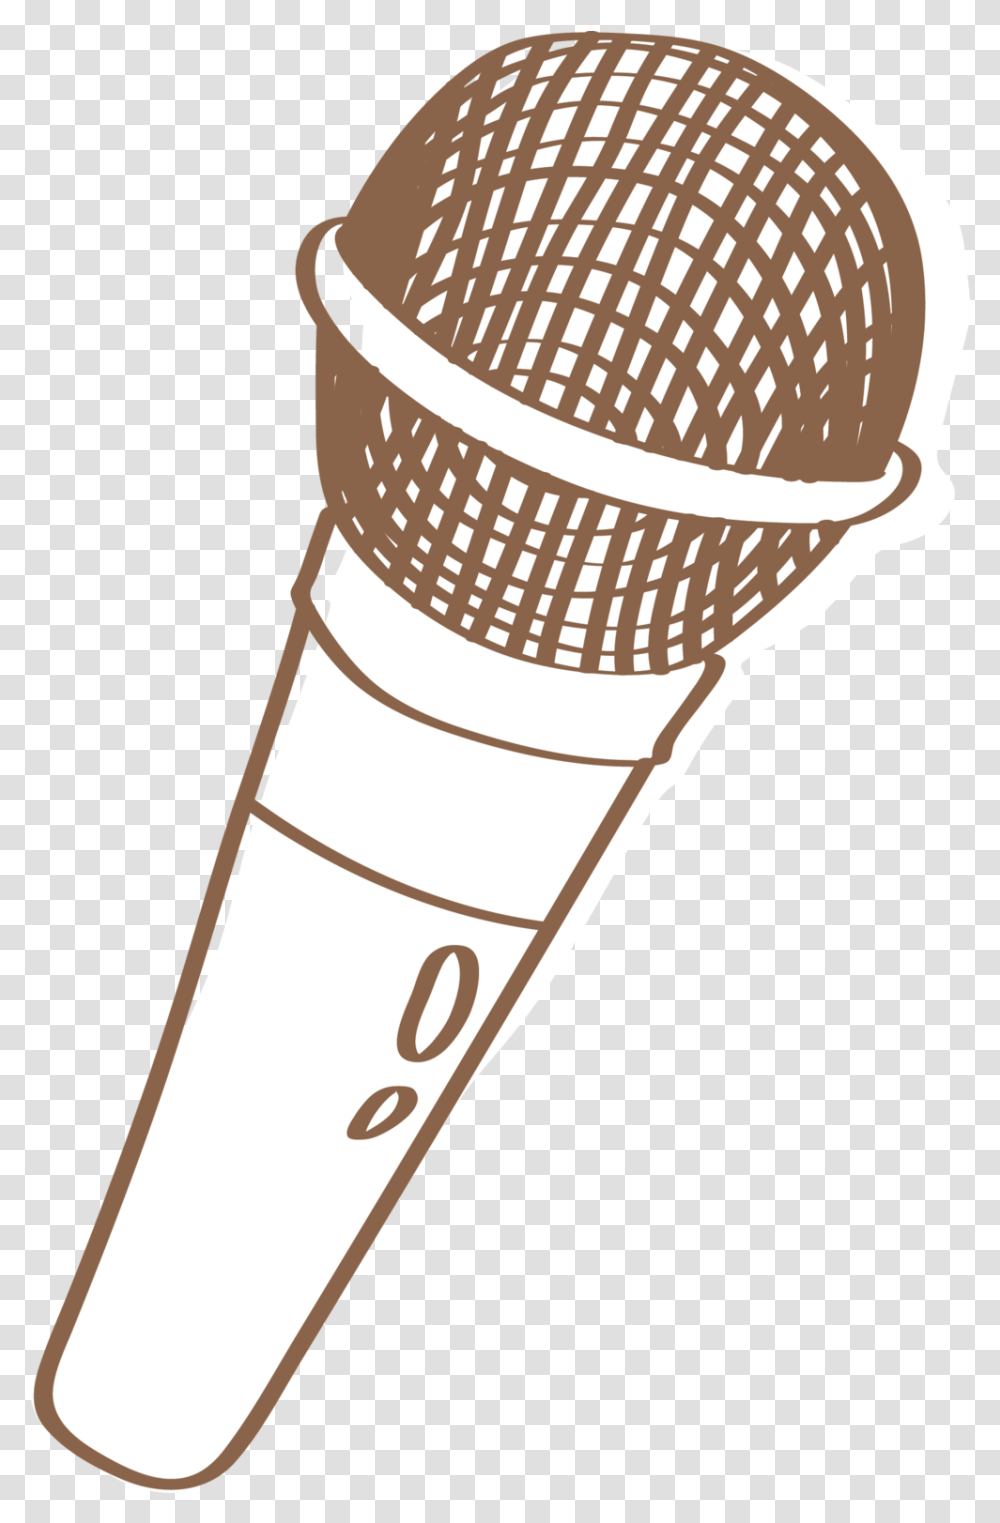 Contact Us - Music Buddies Clip Art, Lamp, Electrical Device, Microphone Transparent Png